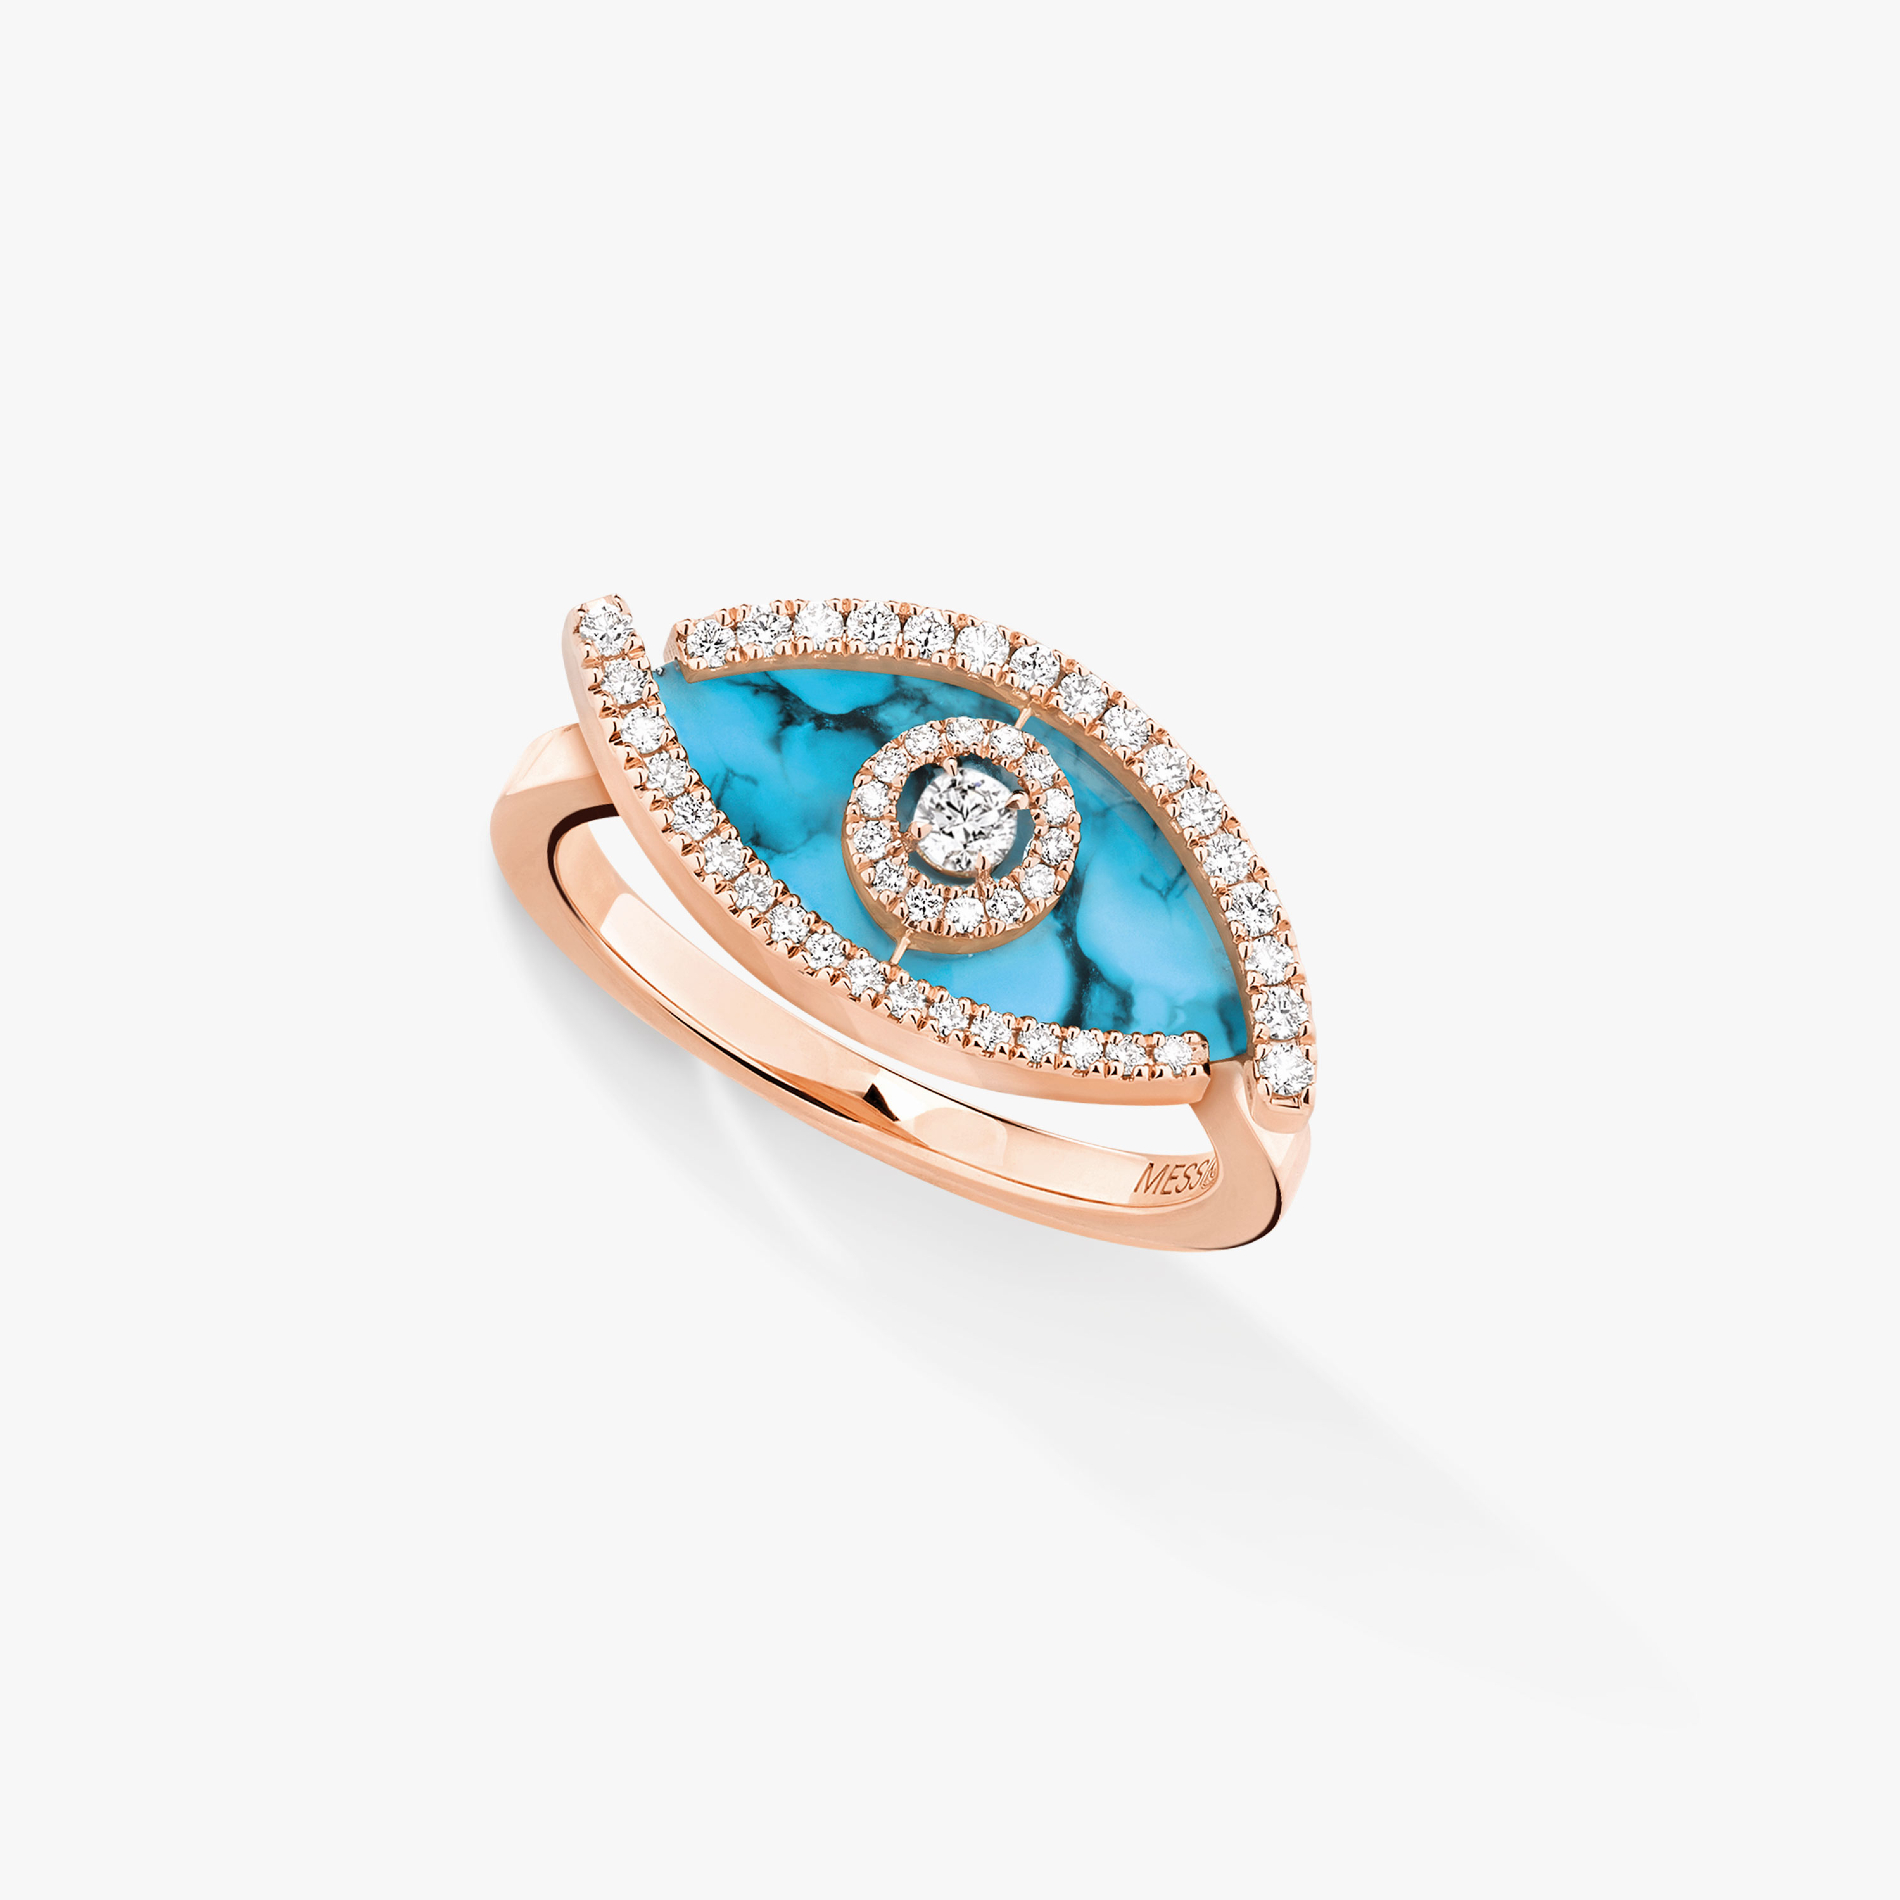 Bague Femme Or Rose Diamant Lucky Eye Turquoise 12956-PG